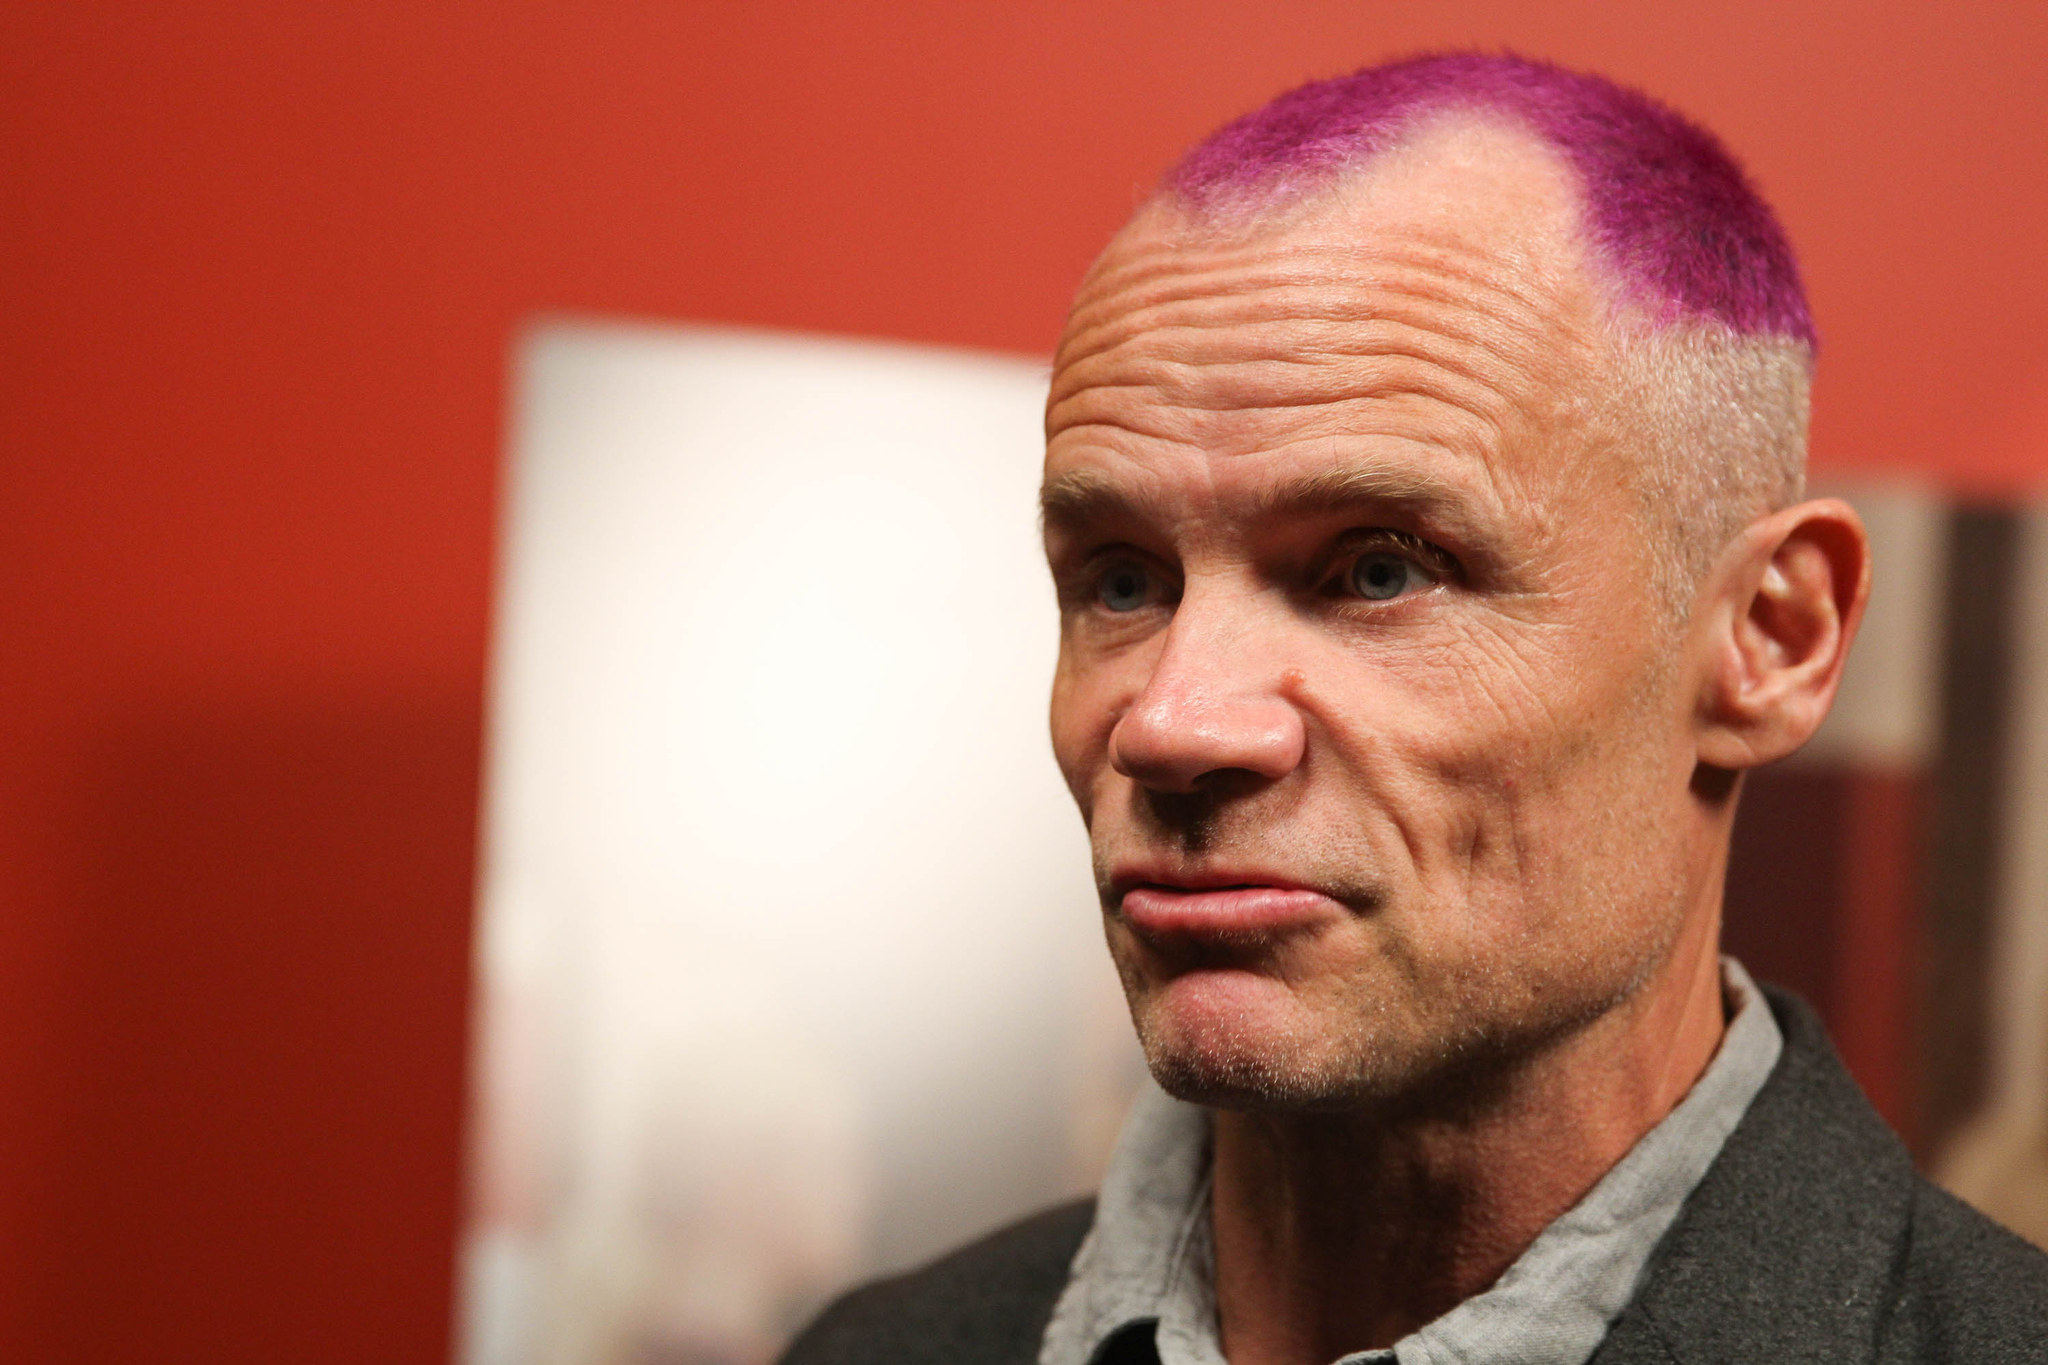 Flea at event of Low Down (2014)